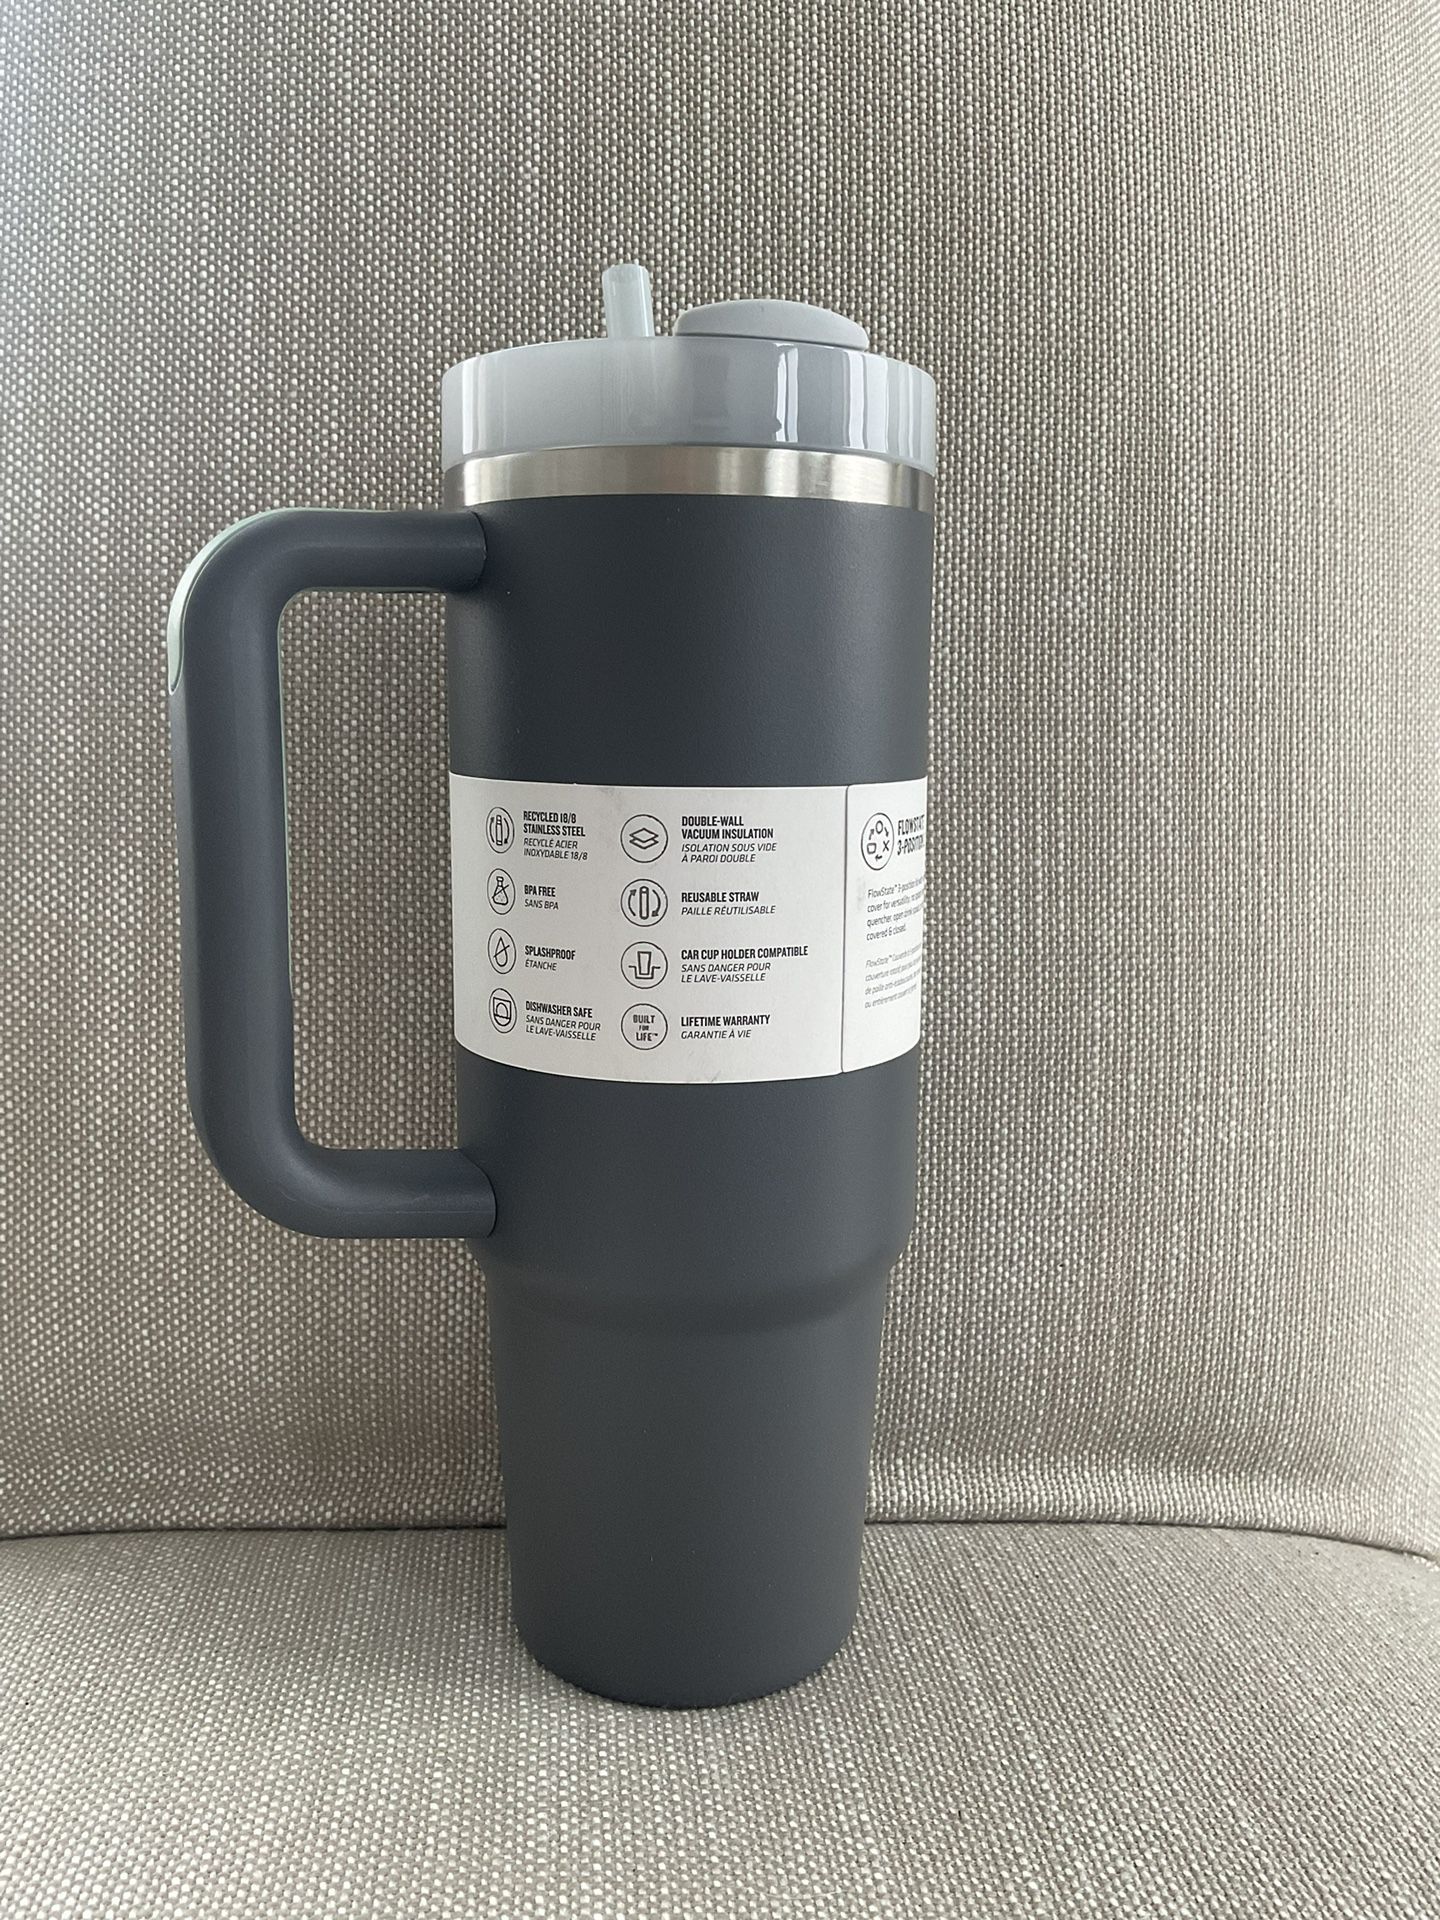 30 oz Fog Blue Grey Stanley Flowstate Quencher H2.0 Tumbler for Sale in  Peoria, AZ - OfferUp